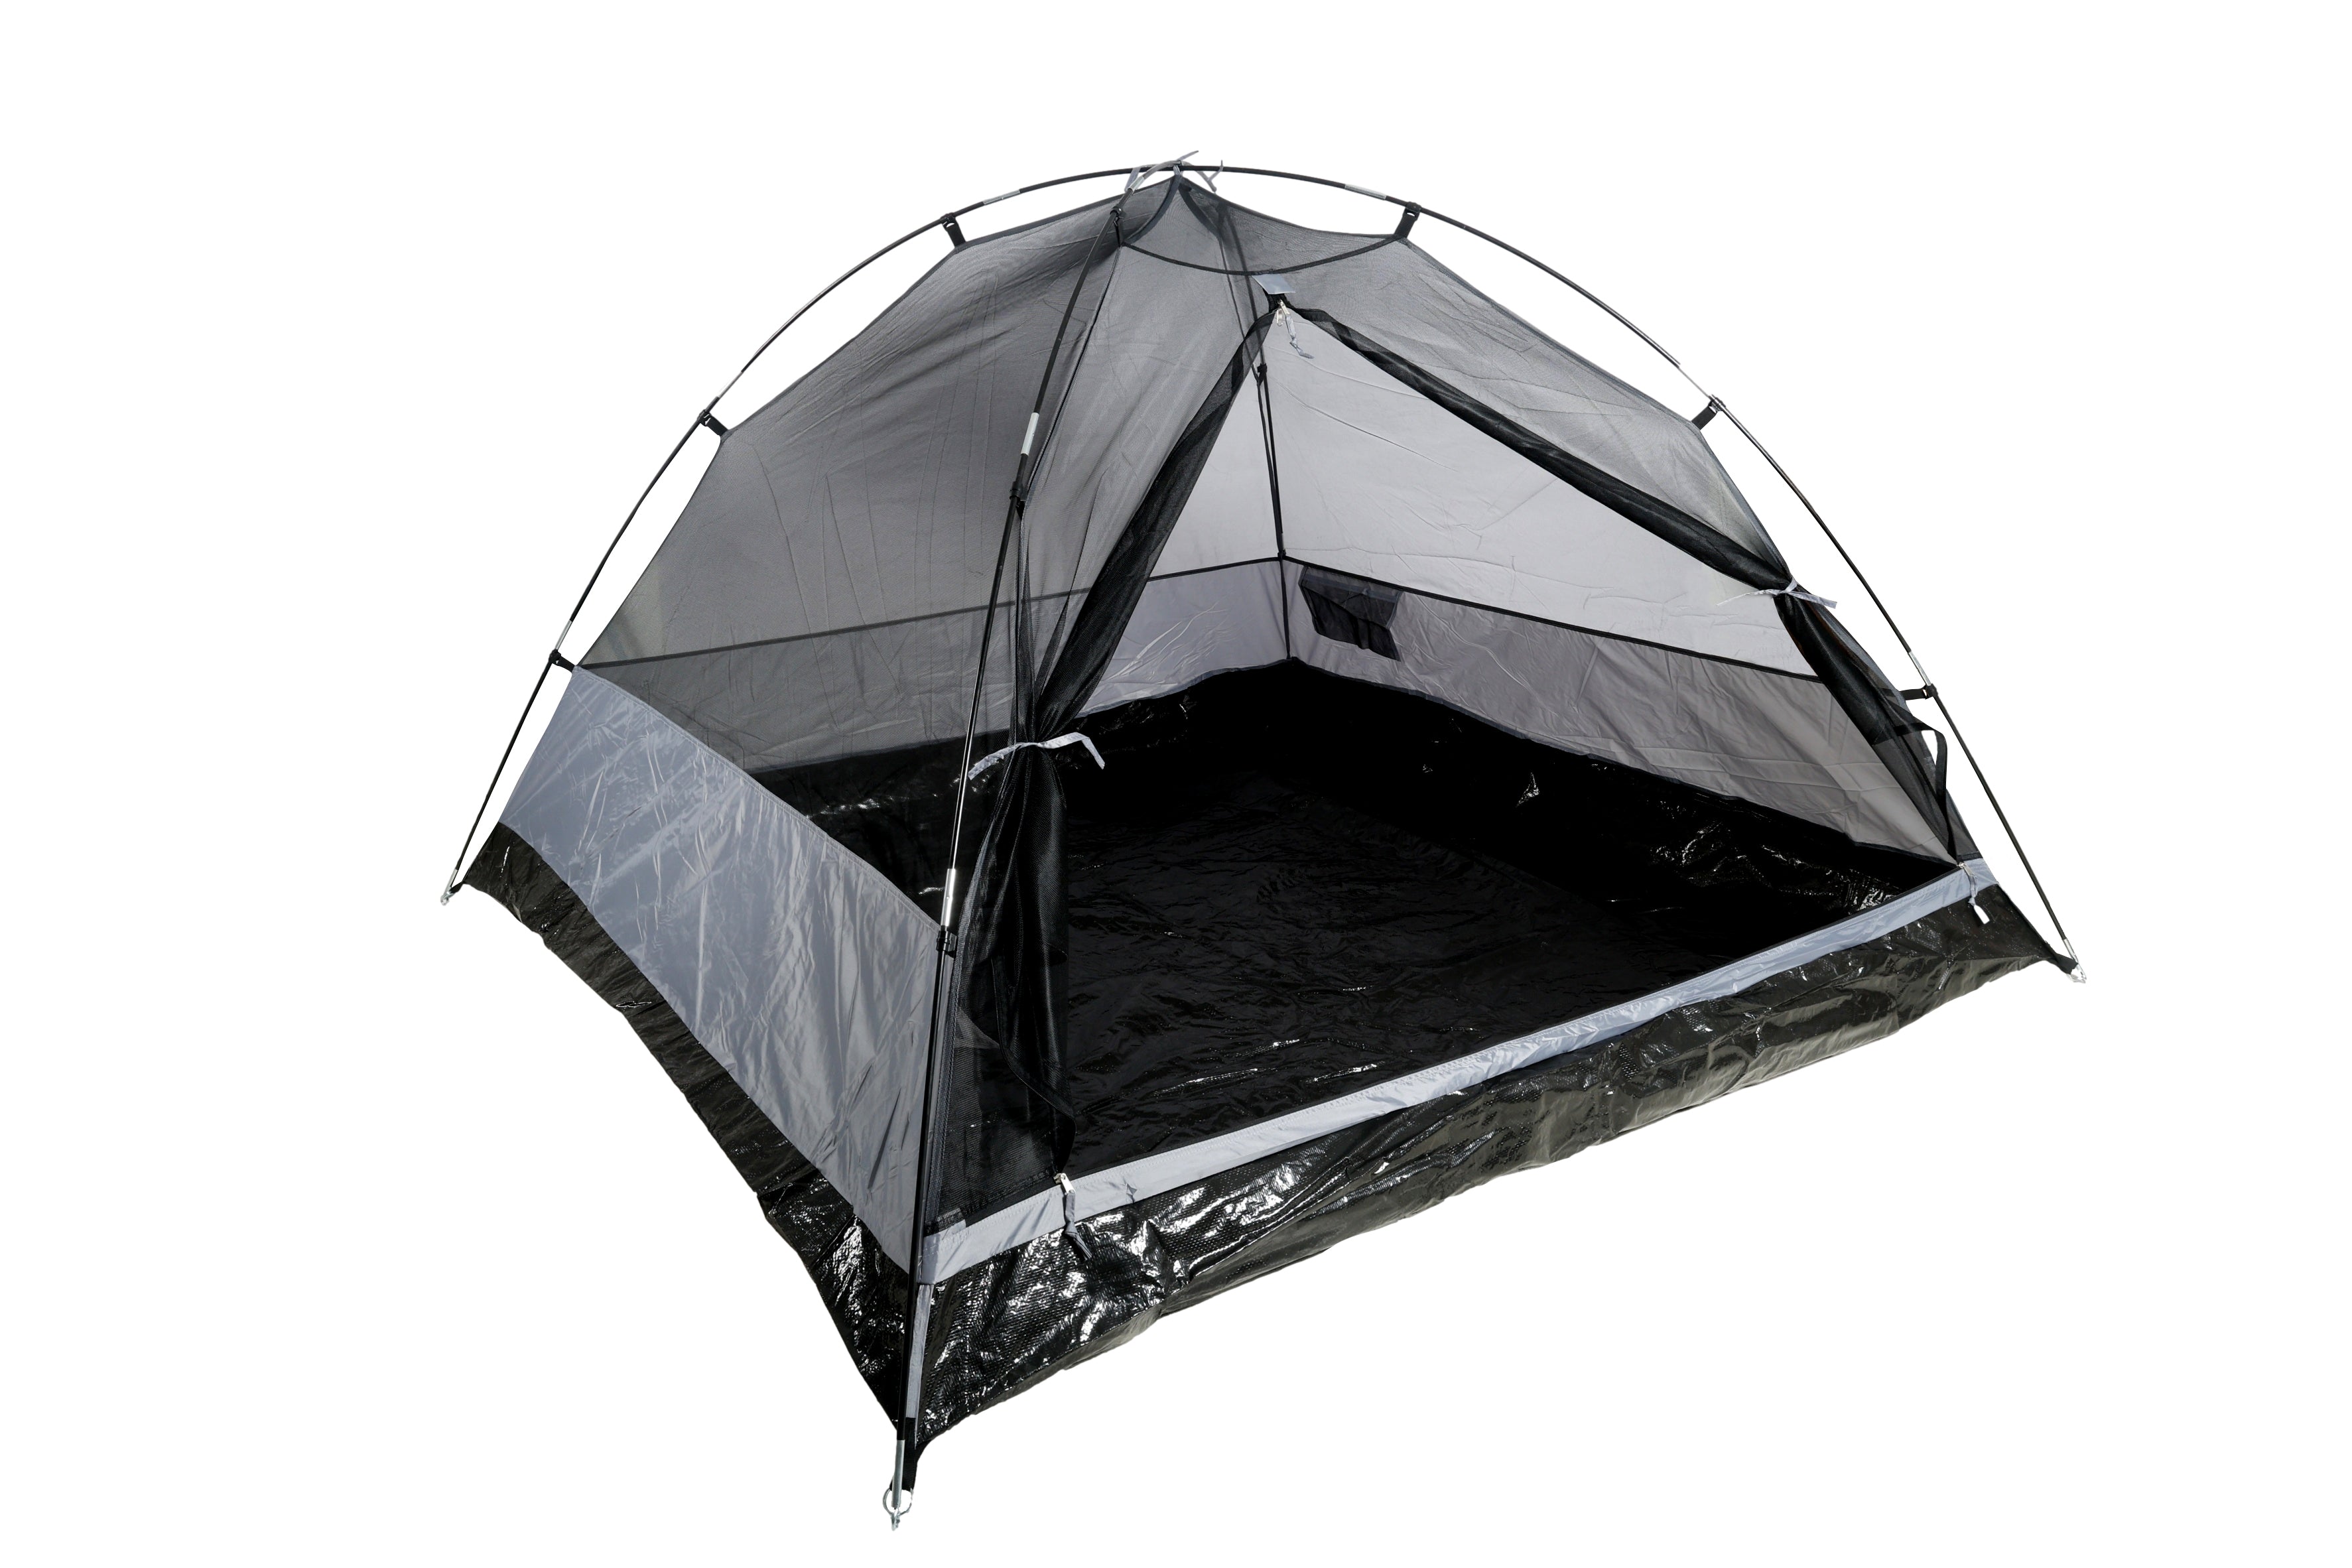 TANAMI SERIES II 3 PERSON DOME TENT